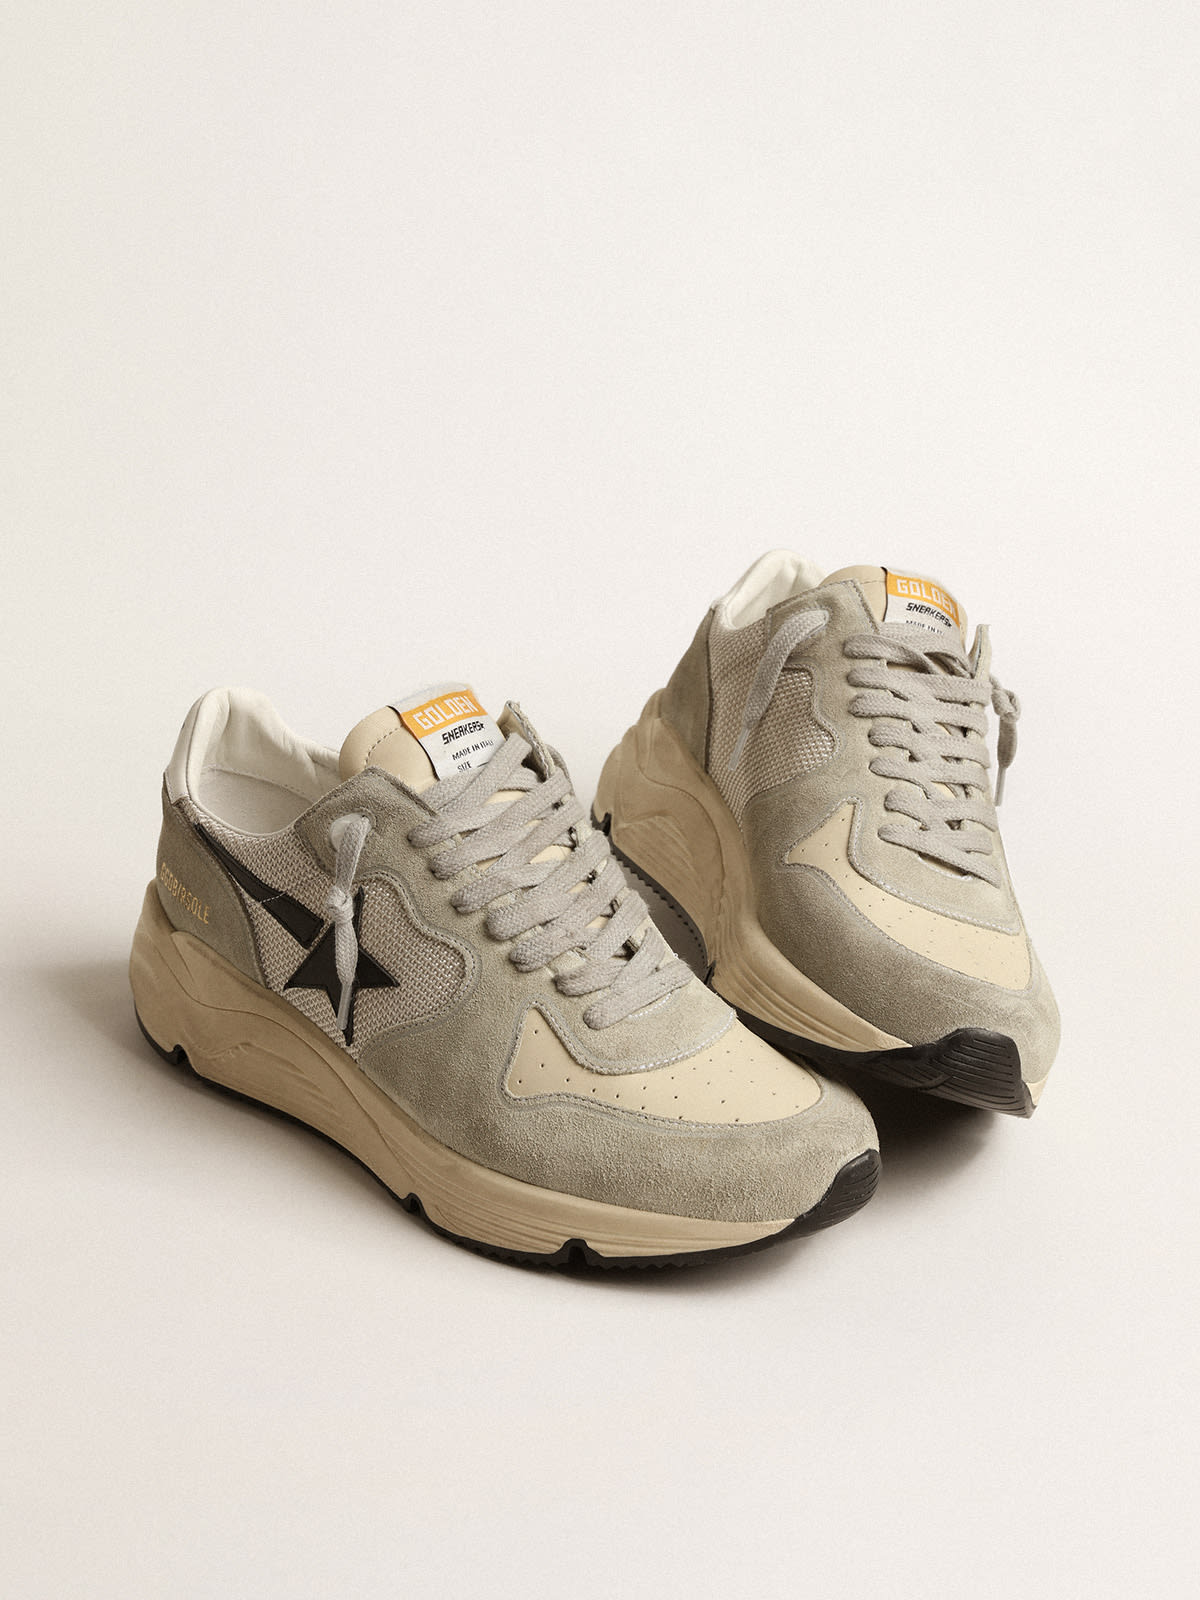 Golden Goose - Running Sole in ice-gray suede and mesh with black leather star in 